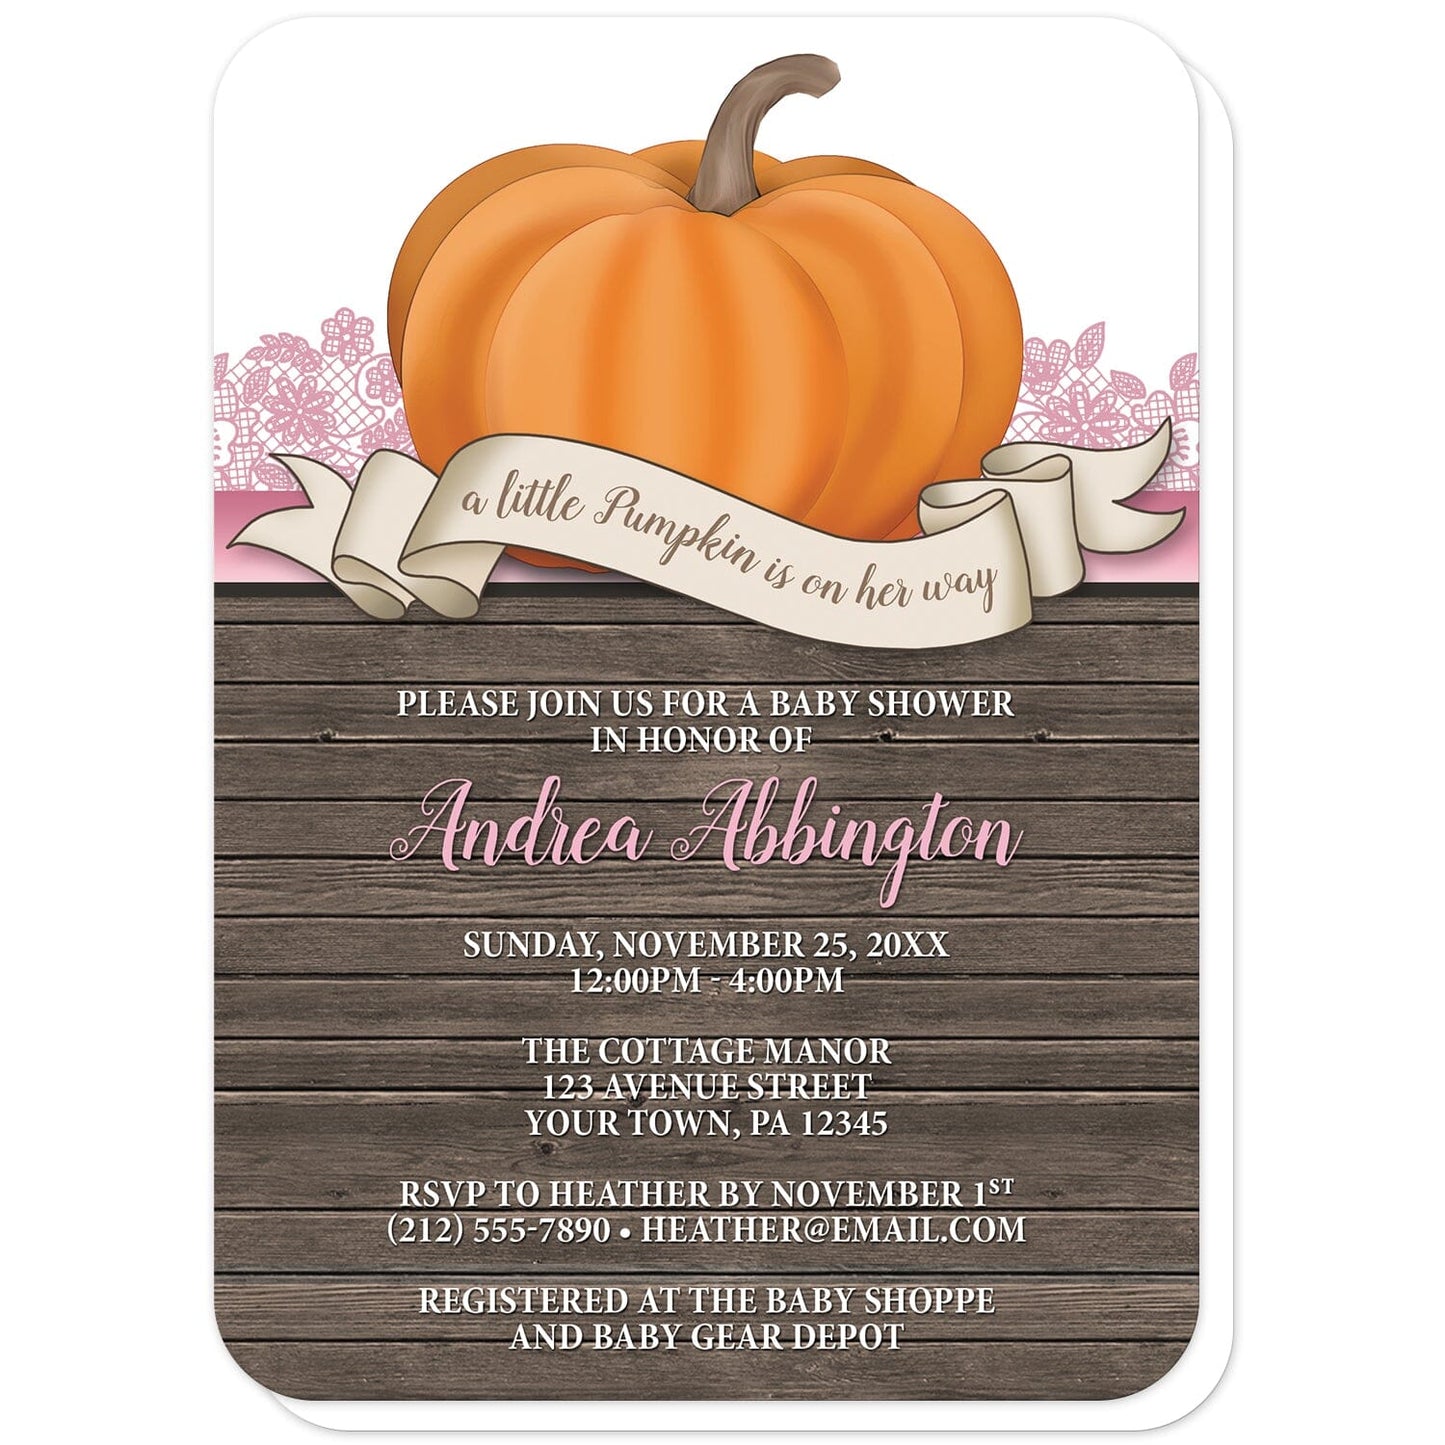 Rustic Orange Pink Pumpkin Baby Shower Invitations (with rounded corners) at Artistically Invited. Rustic orange pink pumpkin baby shower invitations with an illustration of an orange pumpkin over wood and a beige ribbon banner that reads: "a little pumpkin is on her way". This cute pumpkin drawing is set on a horizontal pink stripe with pink lace. The personalized baby shower celebration details you provide will be custom printed in pink and white over a country brown wood background below the pumpkin.